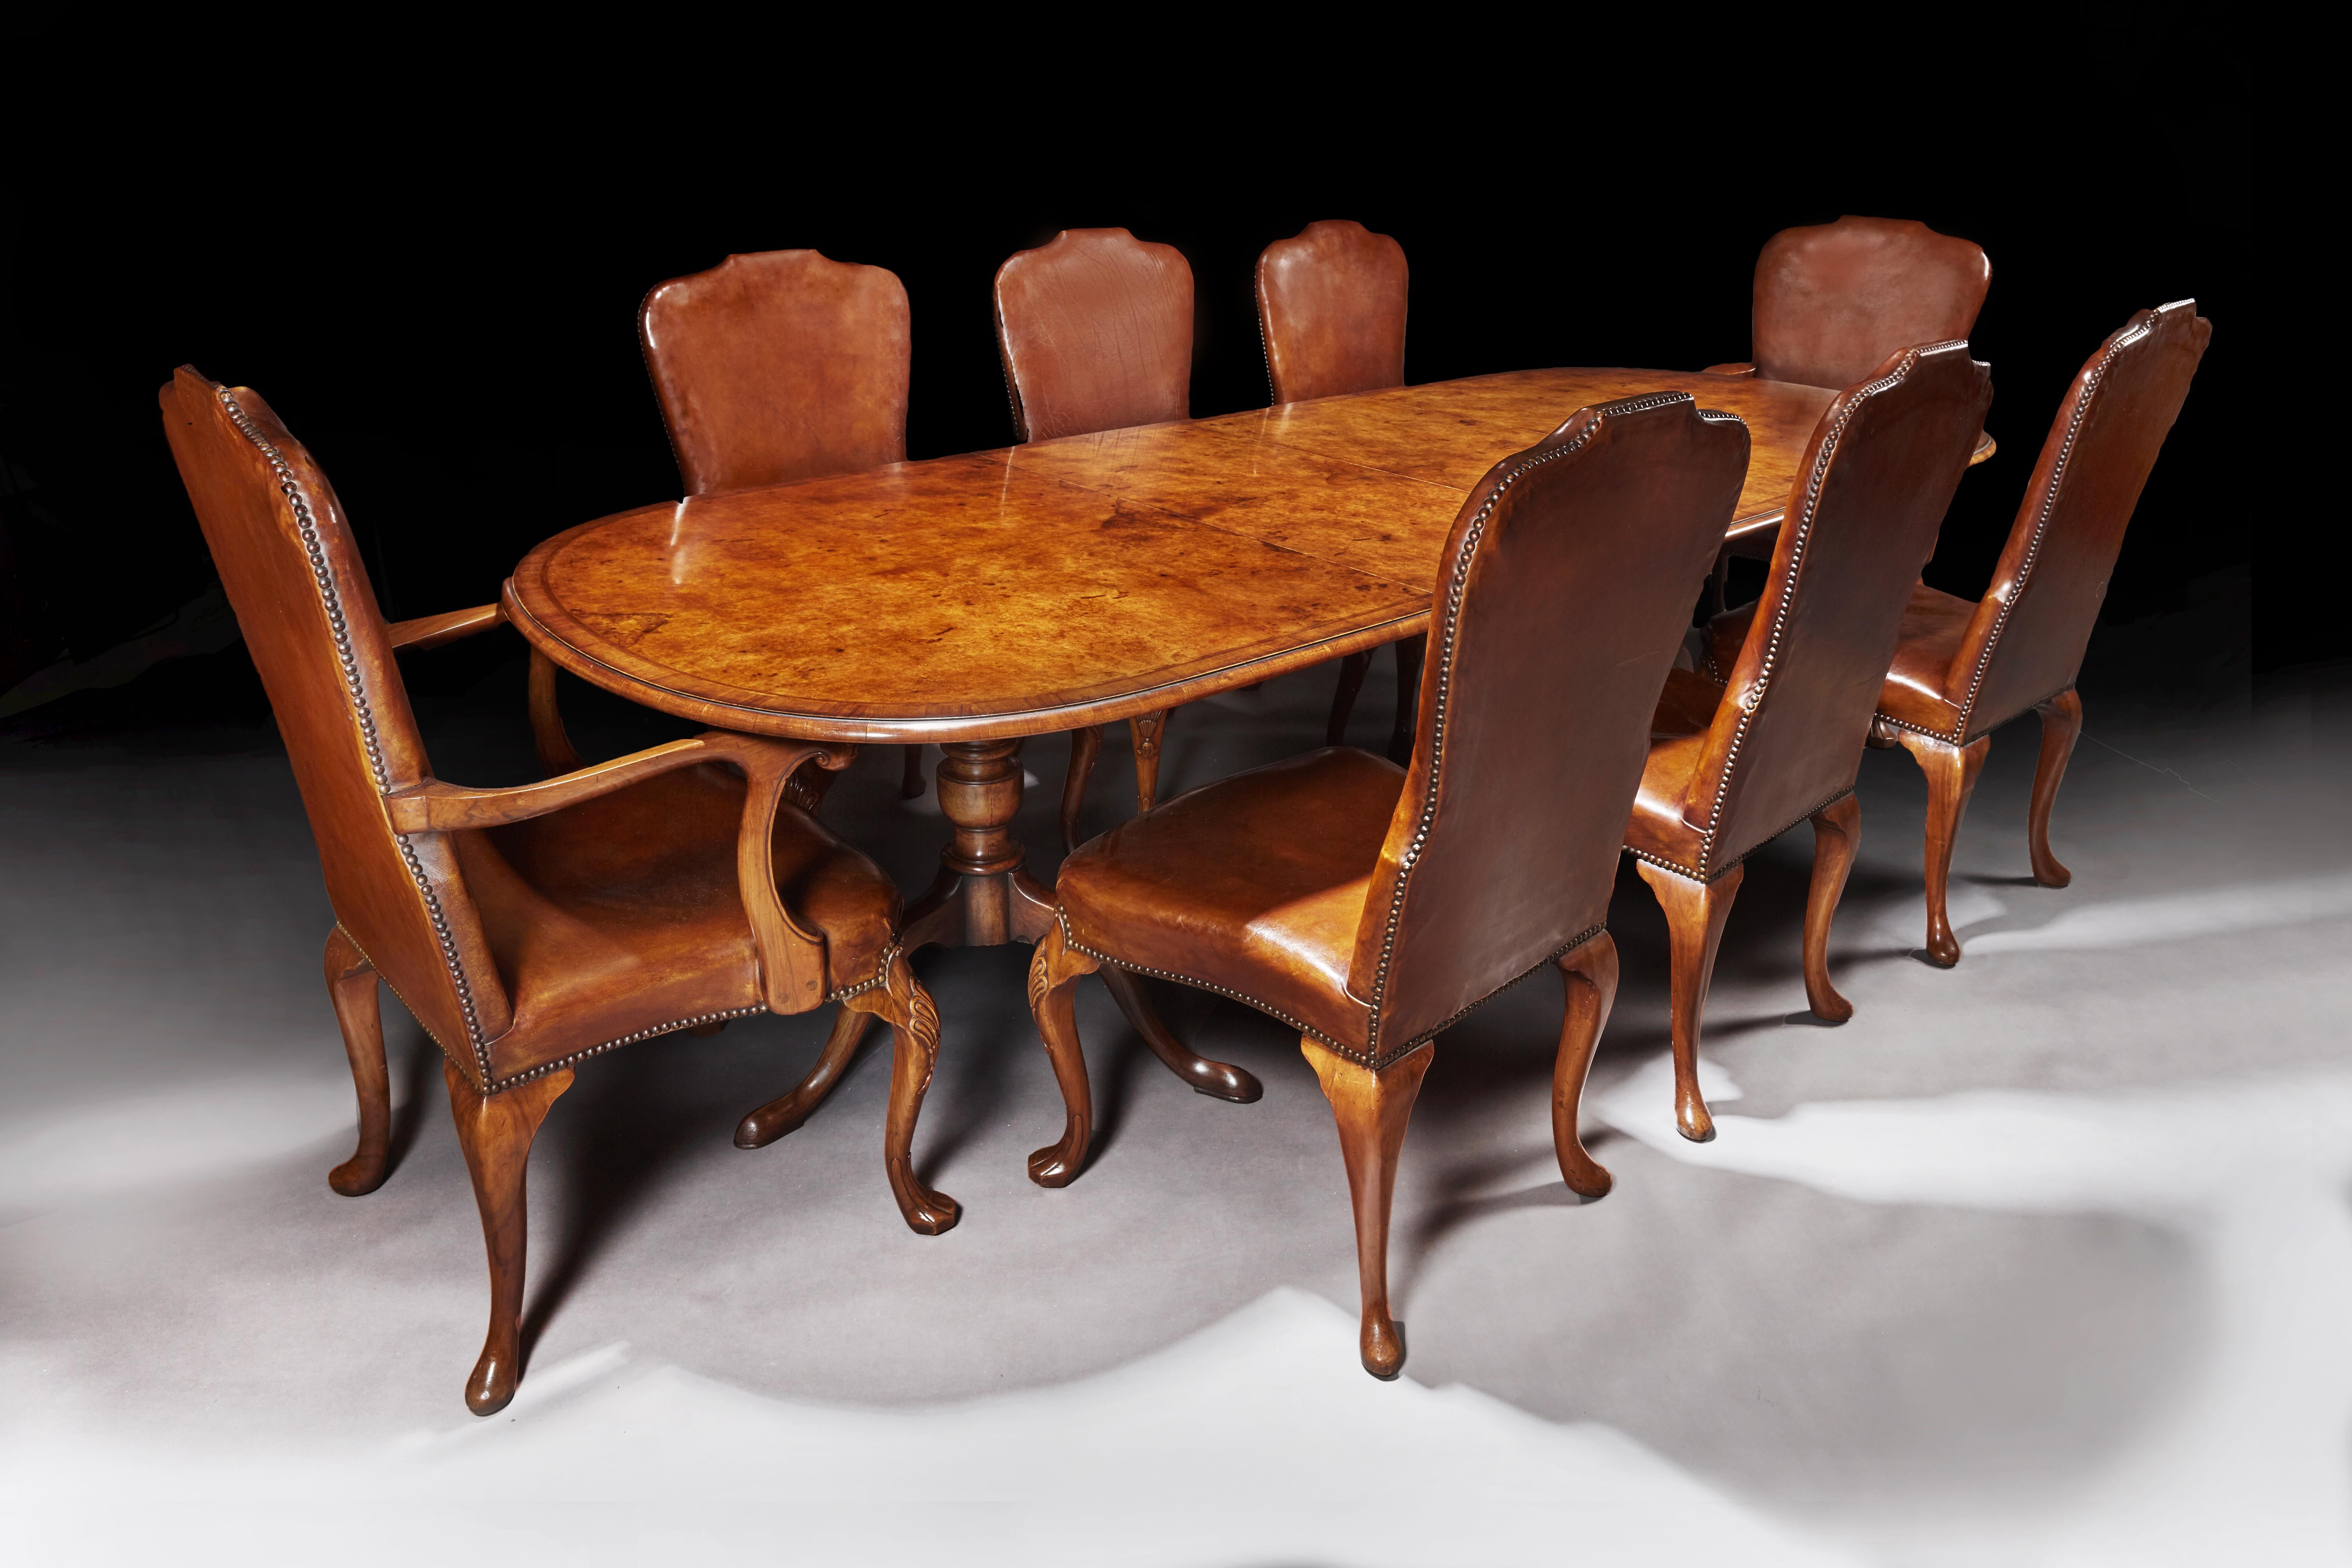 Antique early 20th century walnut dining table set with 8 leather chairs

A very good quality antique early 20th century dining set comprising of an burr walnut extending pedestal dining circa 1920-1930 and a set of 8 (6&2) walnut leather